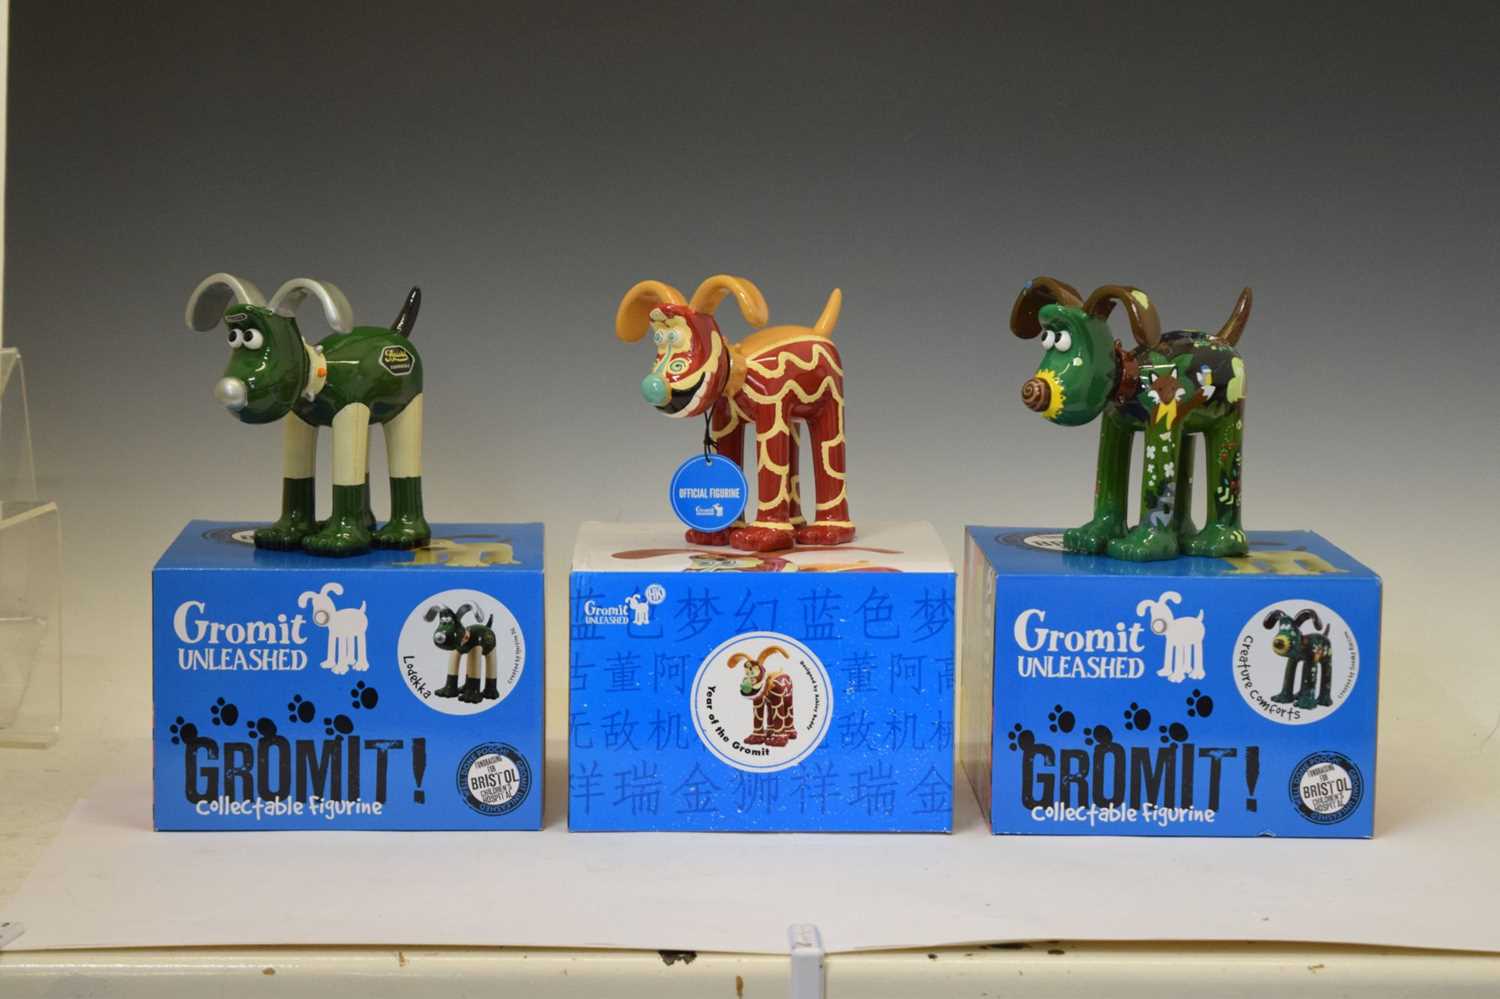 Aardman/Wallace and Gromit - 'Gromit Unleashed' figures - Image 2 of 11